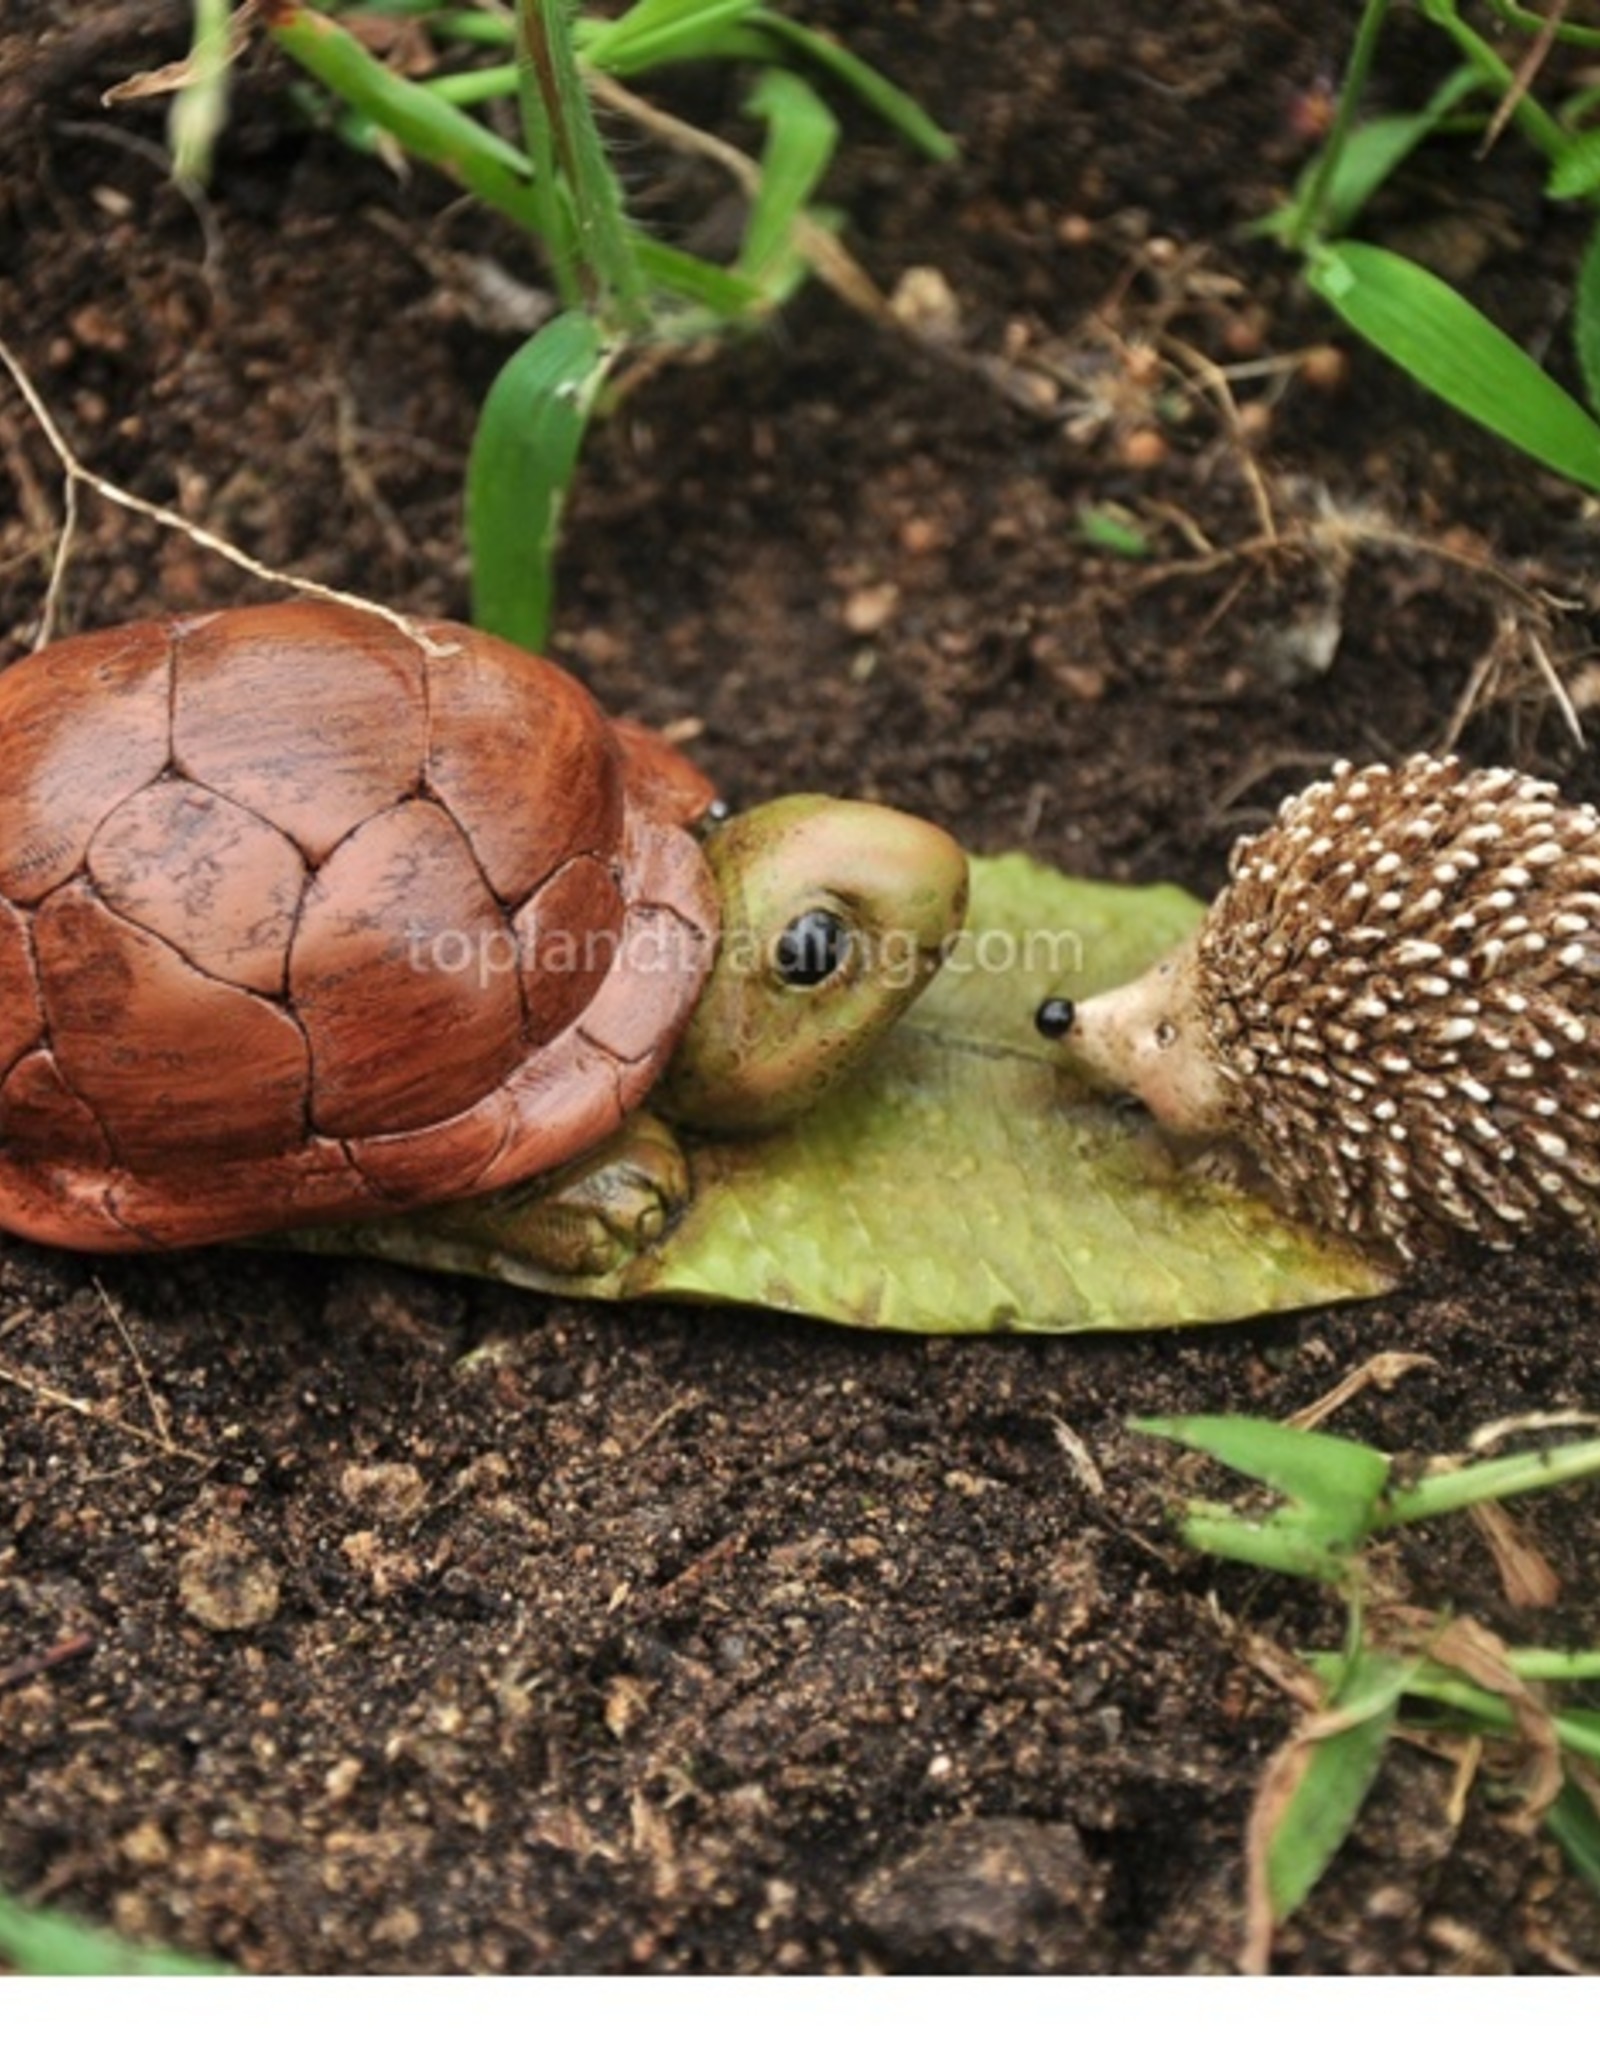 Top Land Trading TURTLE AND HEDGEHOG